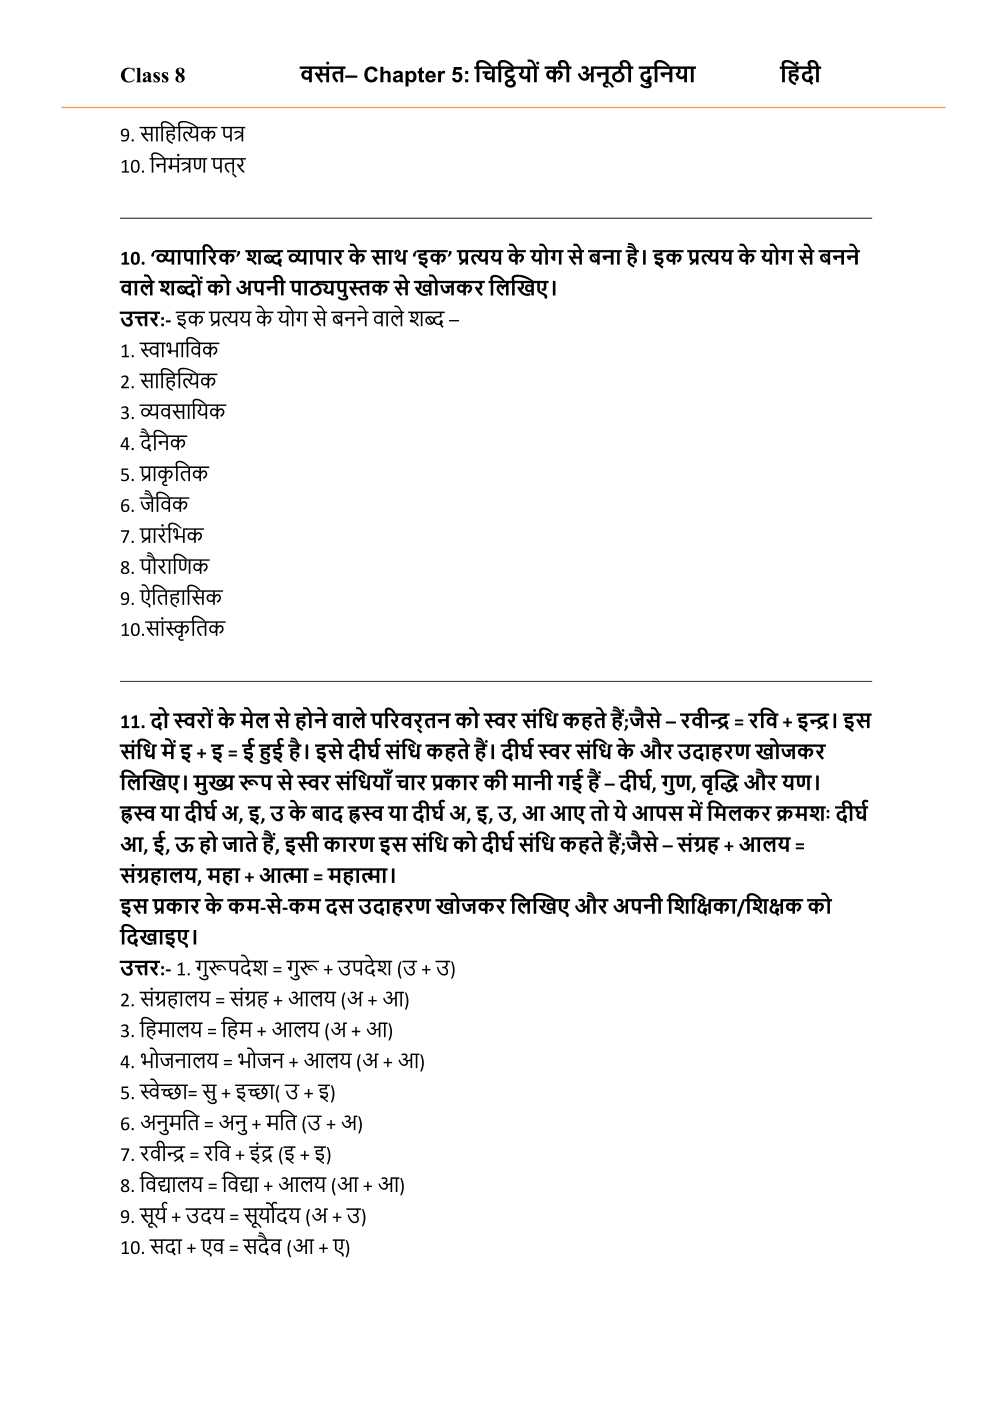 NCERT Solutions For Class 8 Hindi Vasant Chapter 5